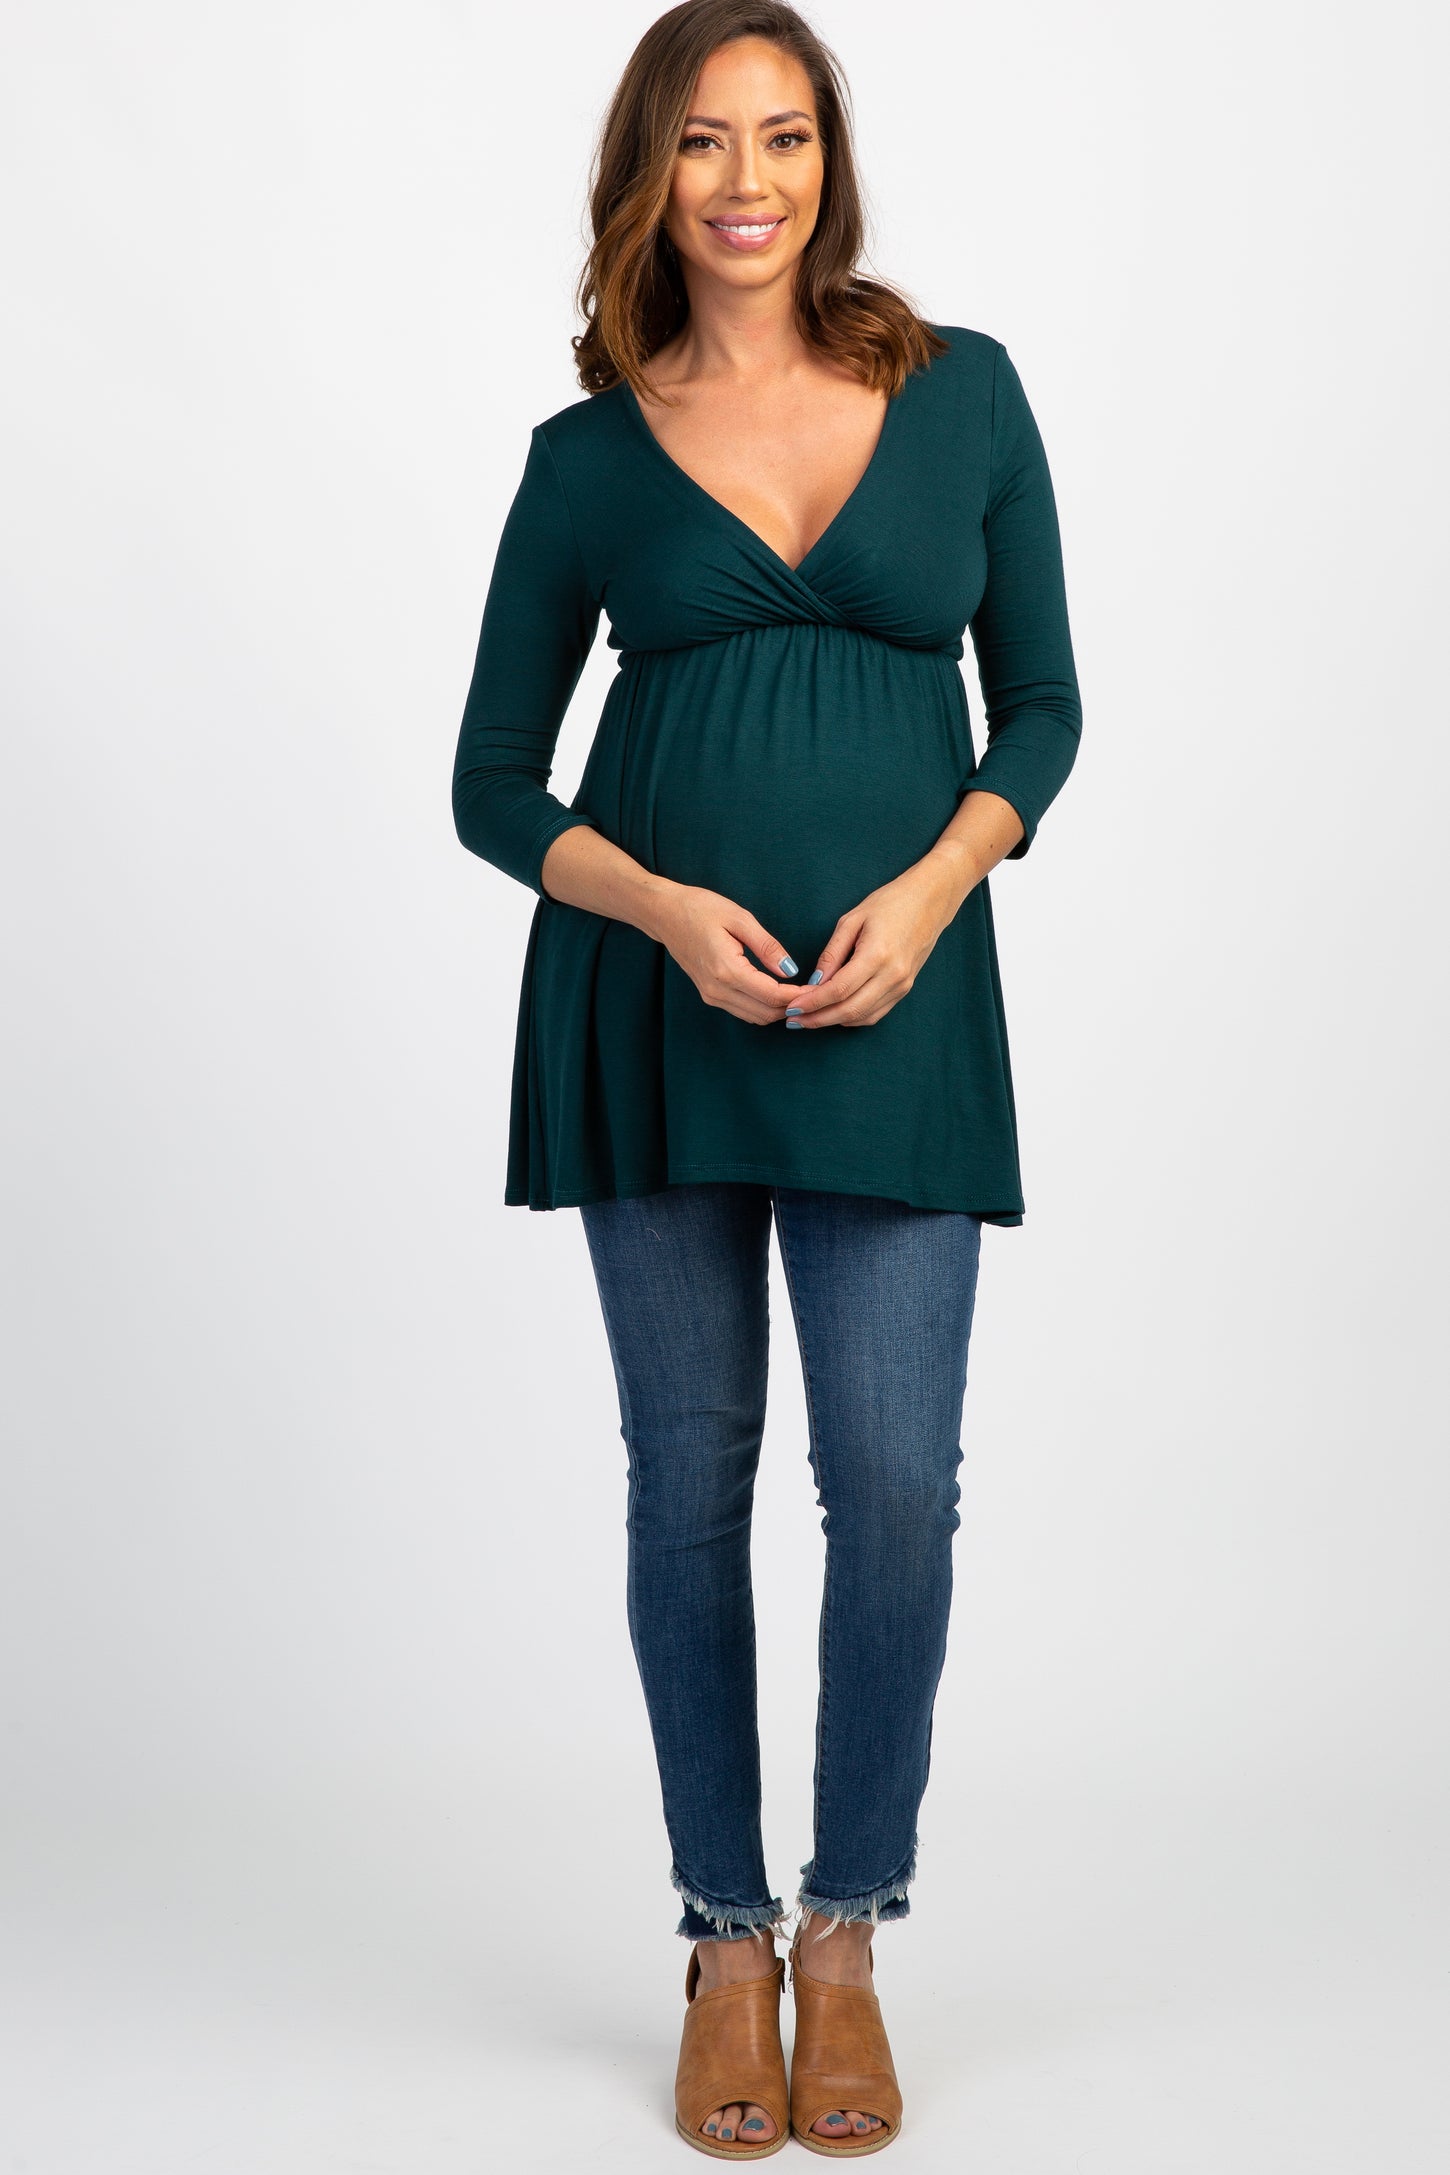 PinkBlush Forest Green Draped Front 3/4 Sleeve Maternity/Nursing Top